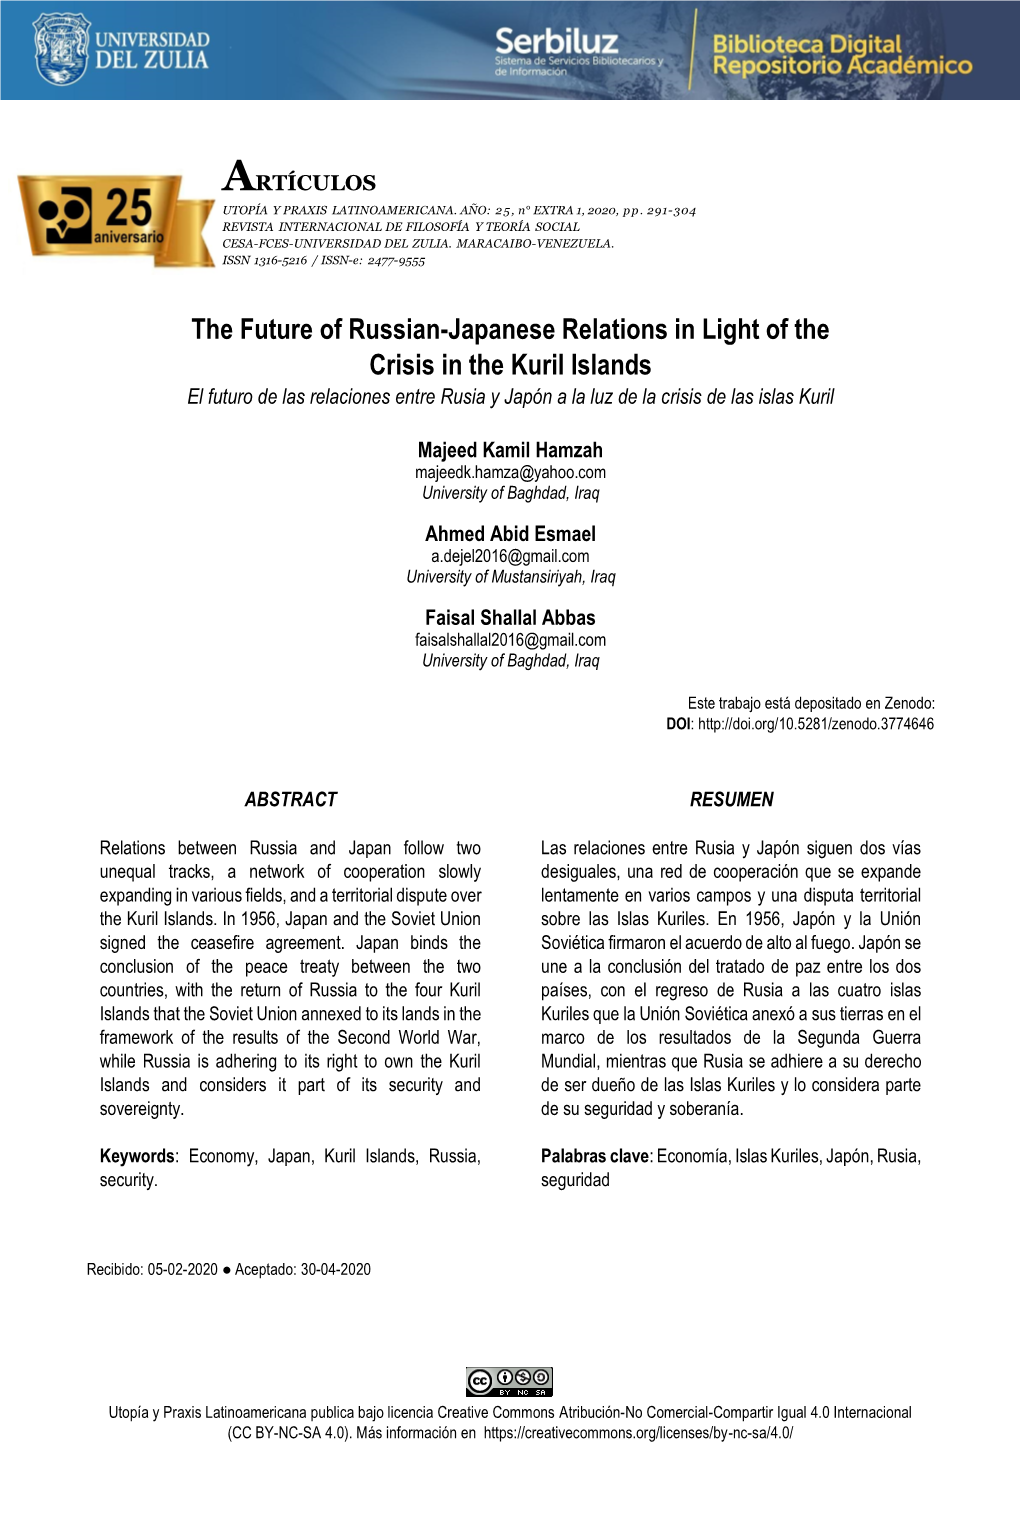 The Future of Russian-Japanese Relations in Light of The